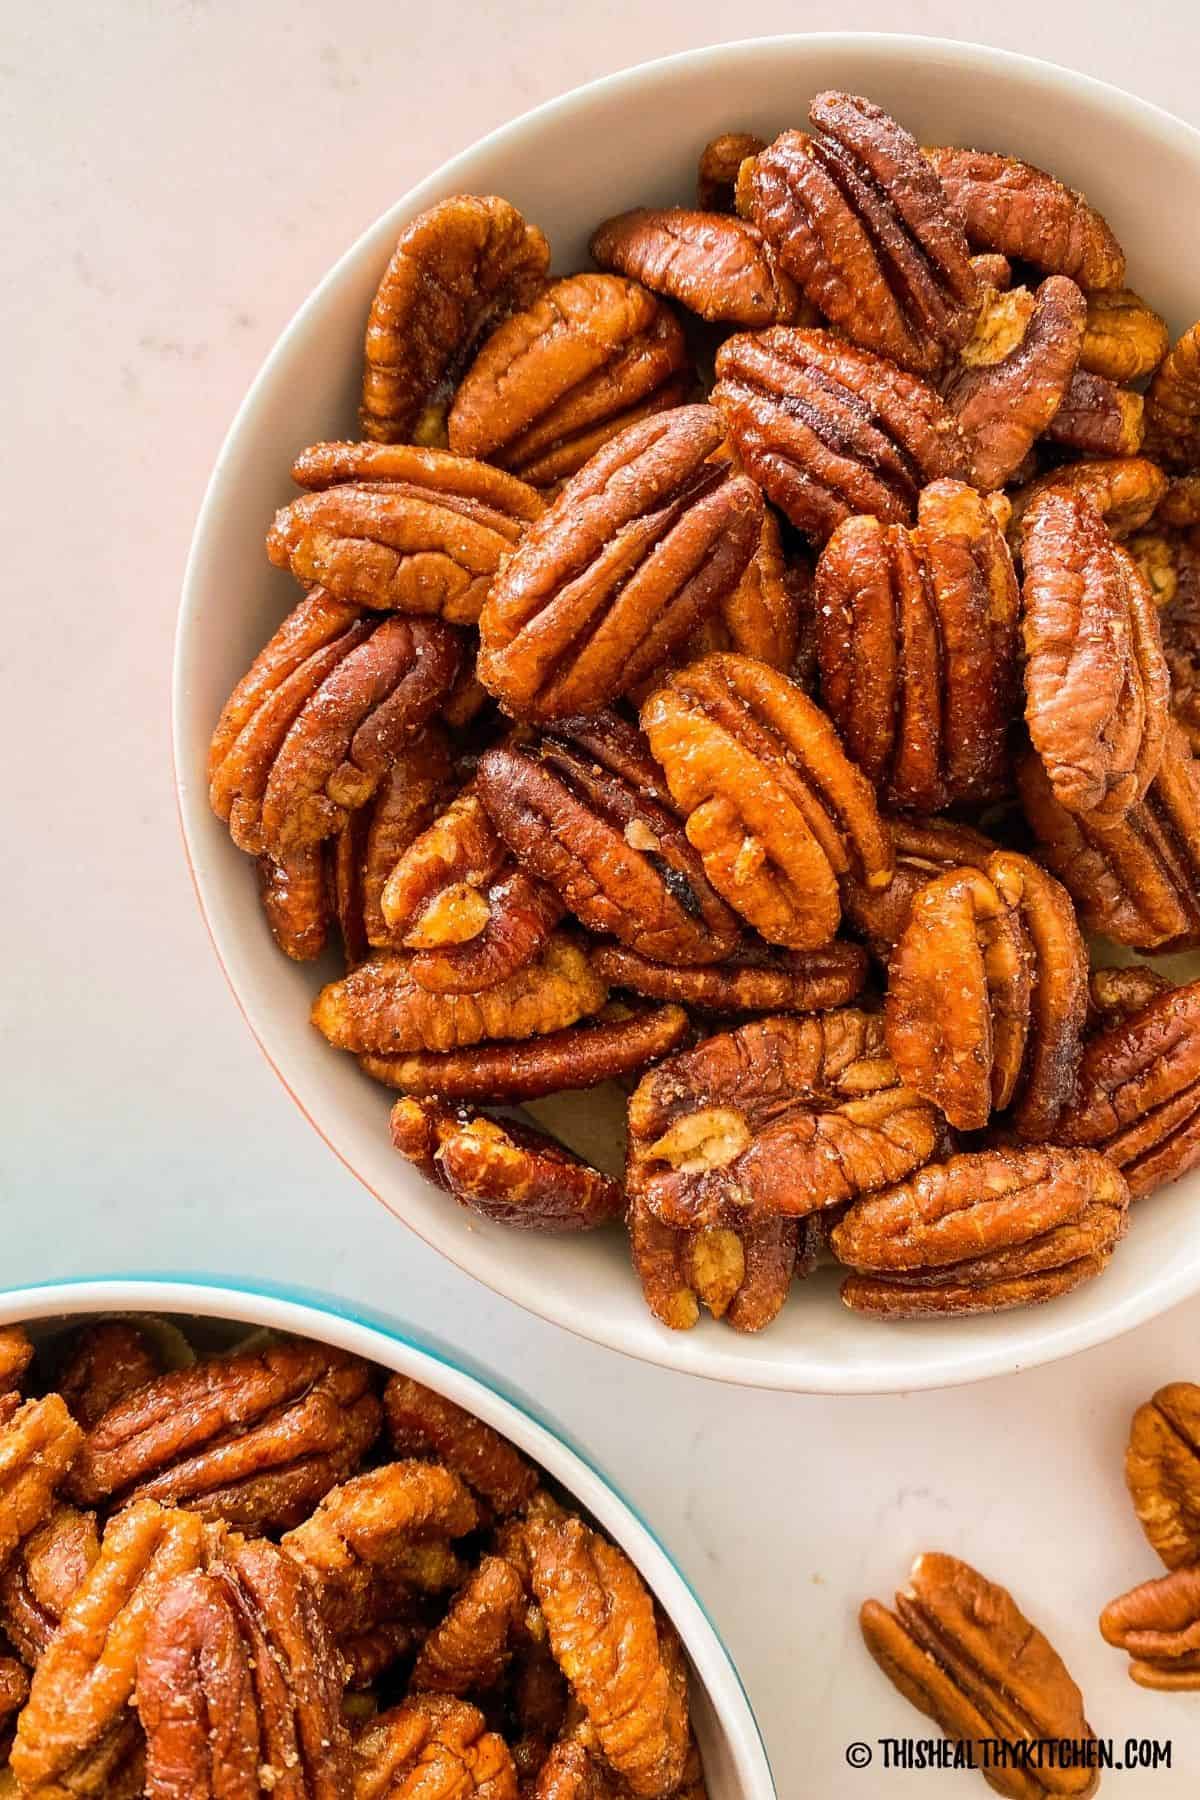 Candied pecans with savoury spices in white bowl.